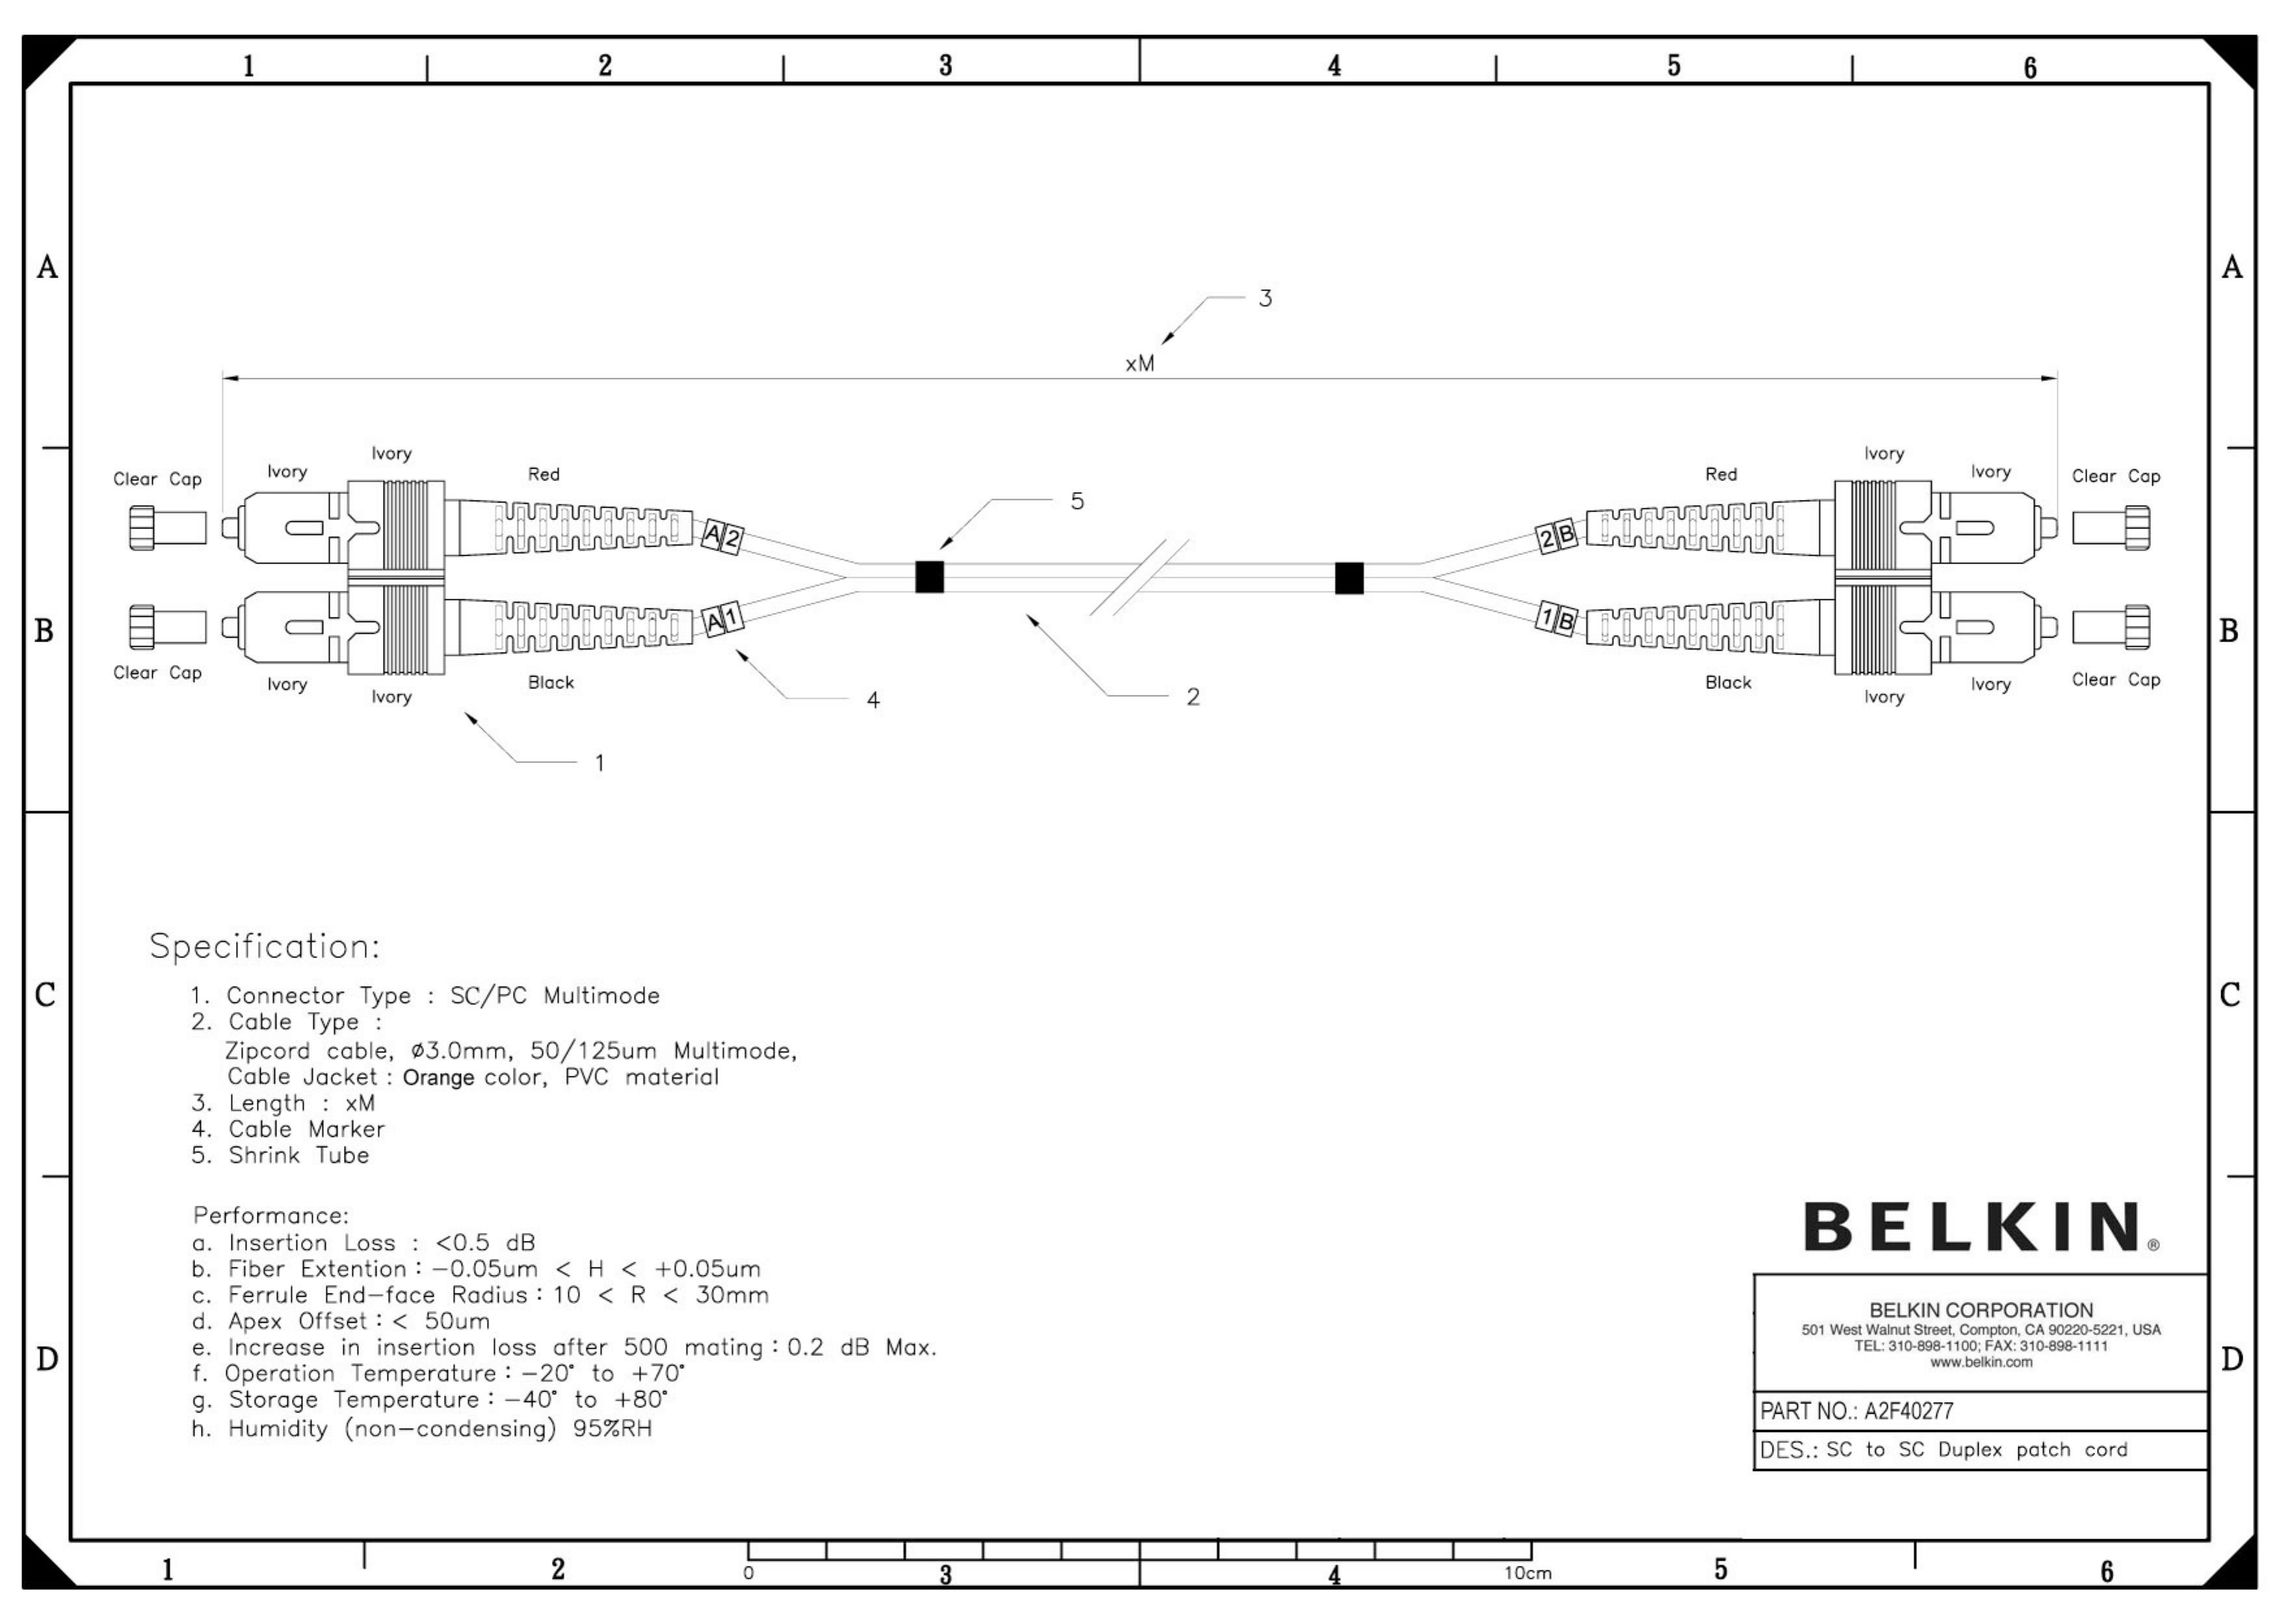 Belkin A2F40277 Network Cables User Manual